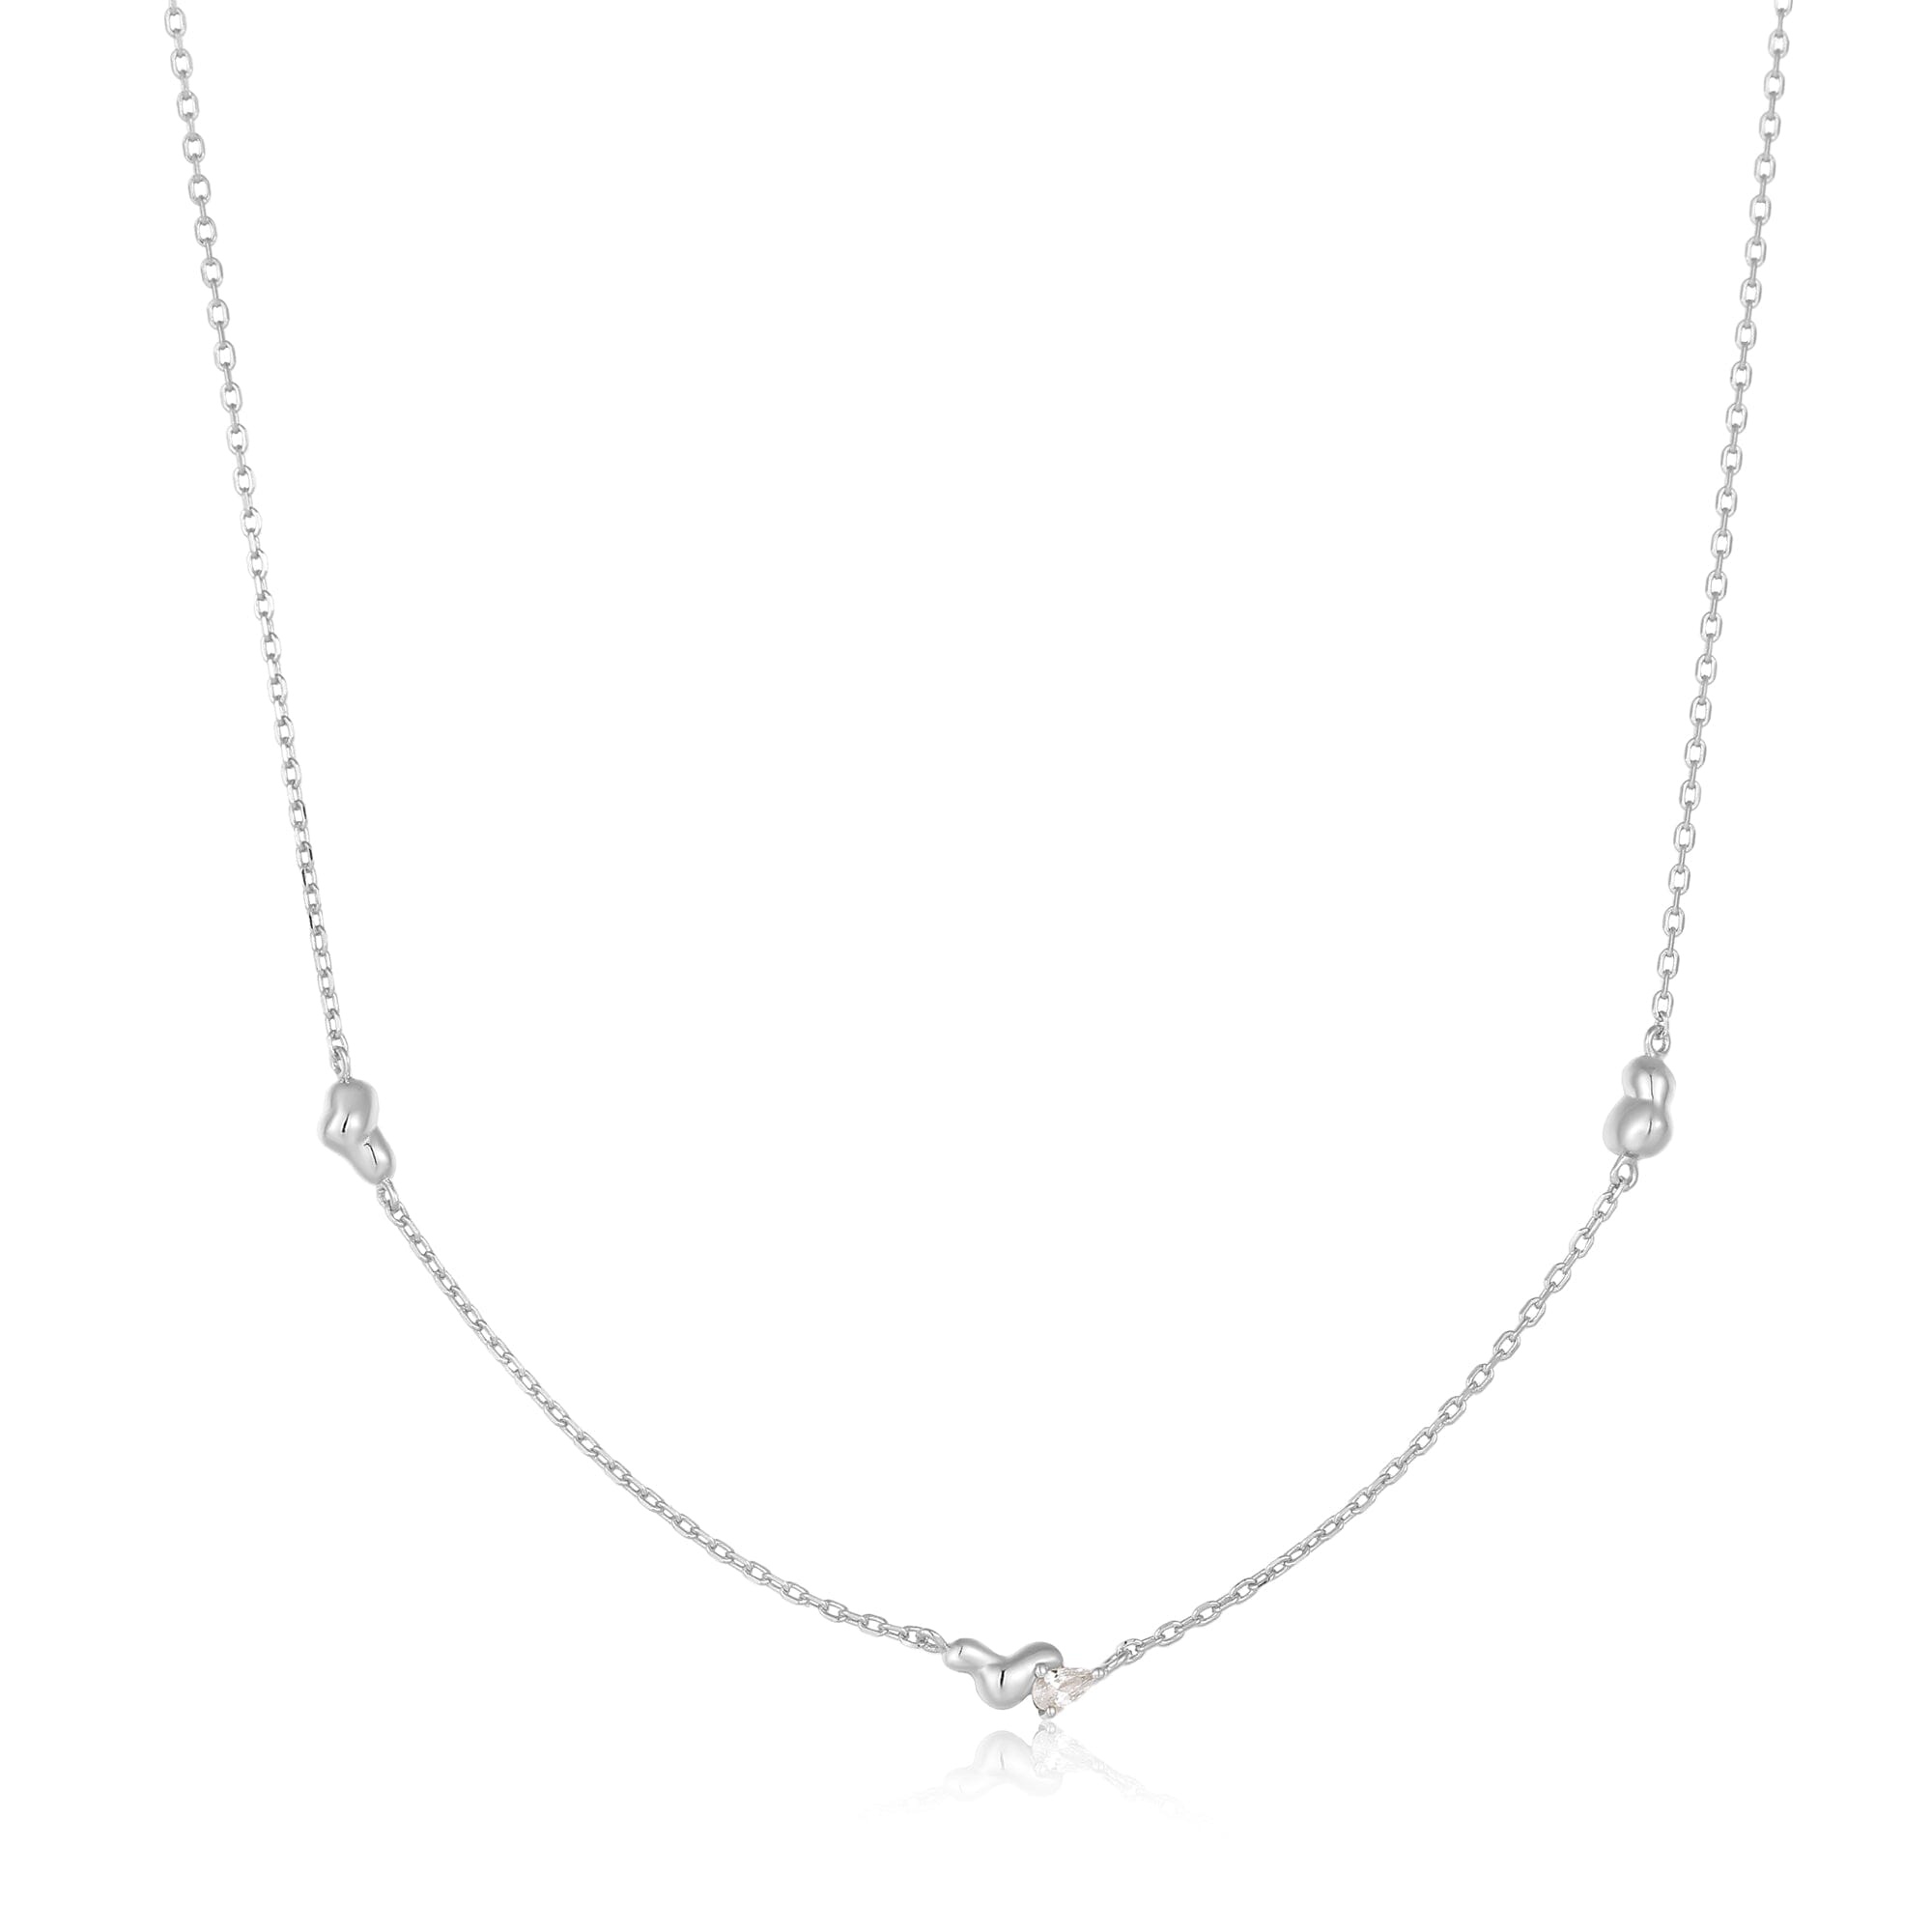 Ania Haie Silver Twisted Wave Chain Necklace Necklaces Ania Haie 